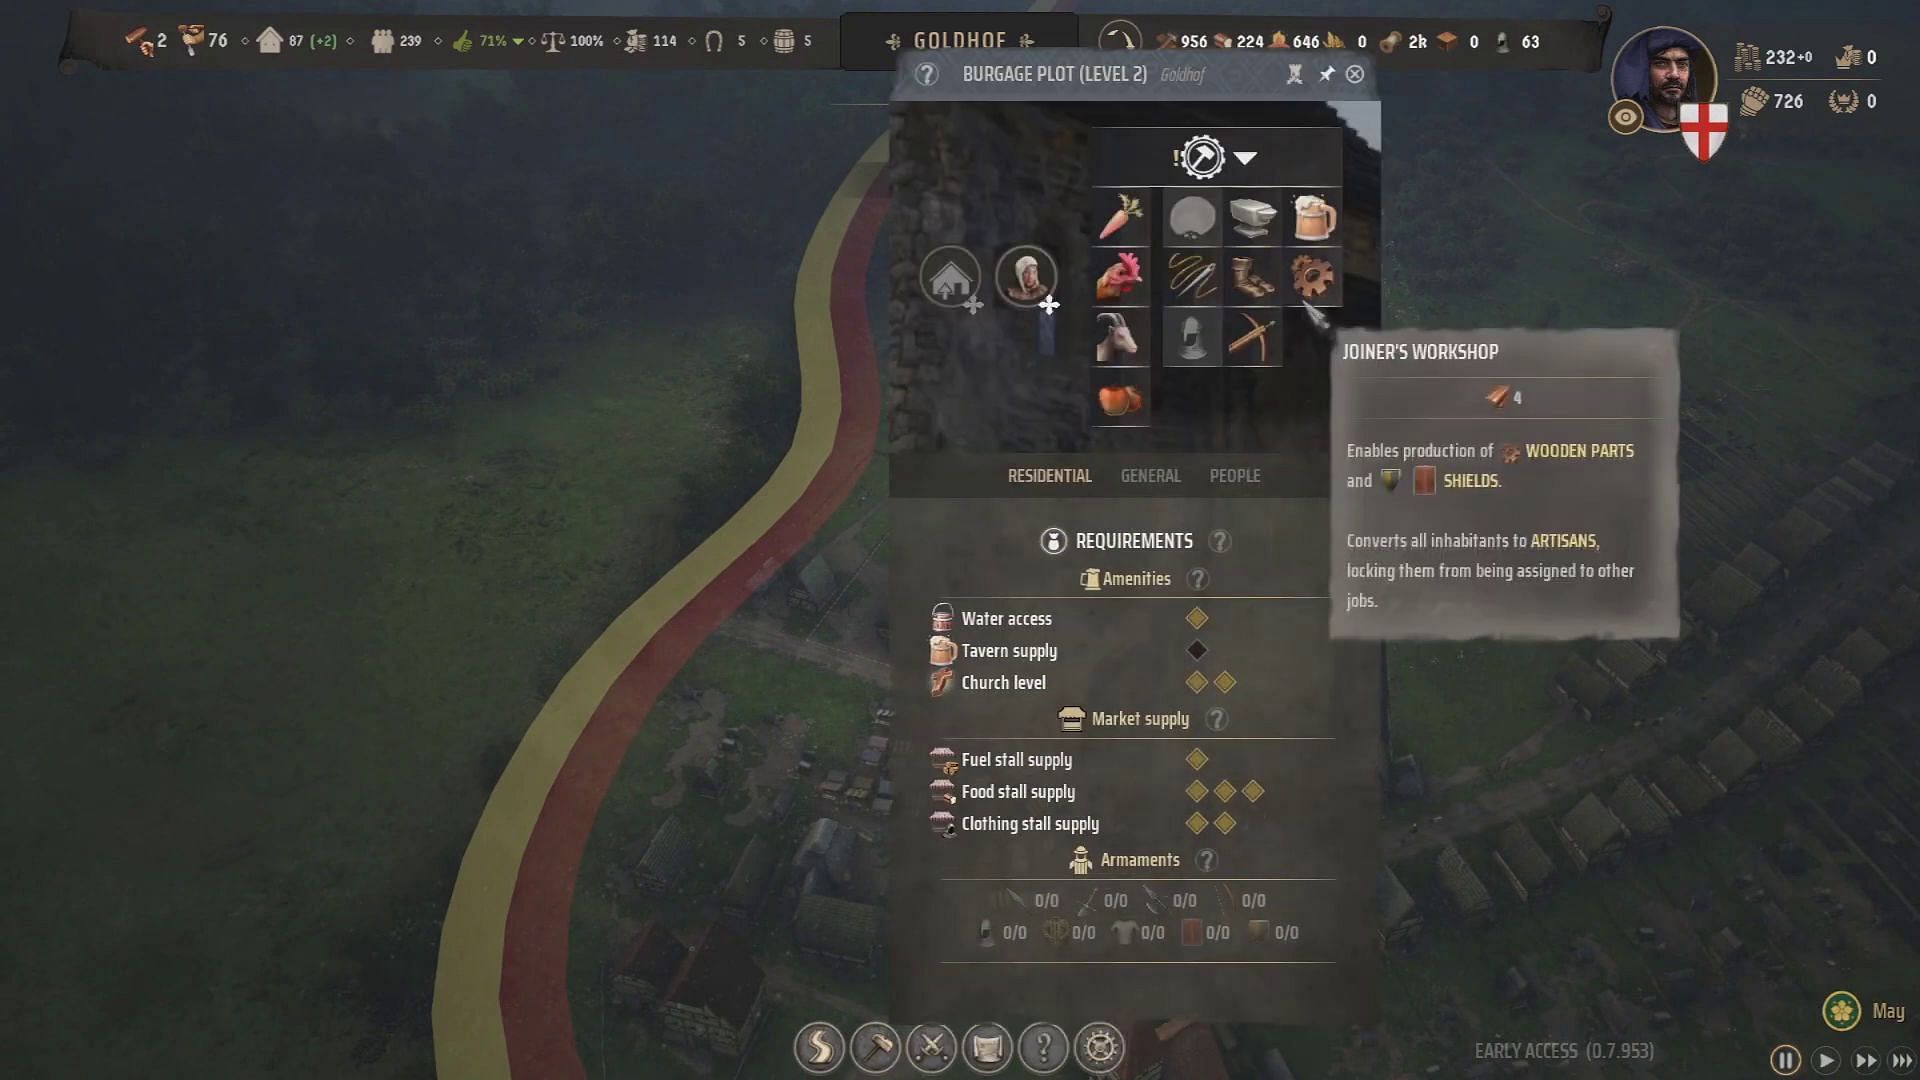 Burgage plot level 2 requirements for Ale in Manor Lords (Image via Slavic Magic || YouTube/JGM Gaming)